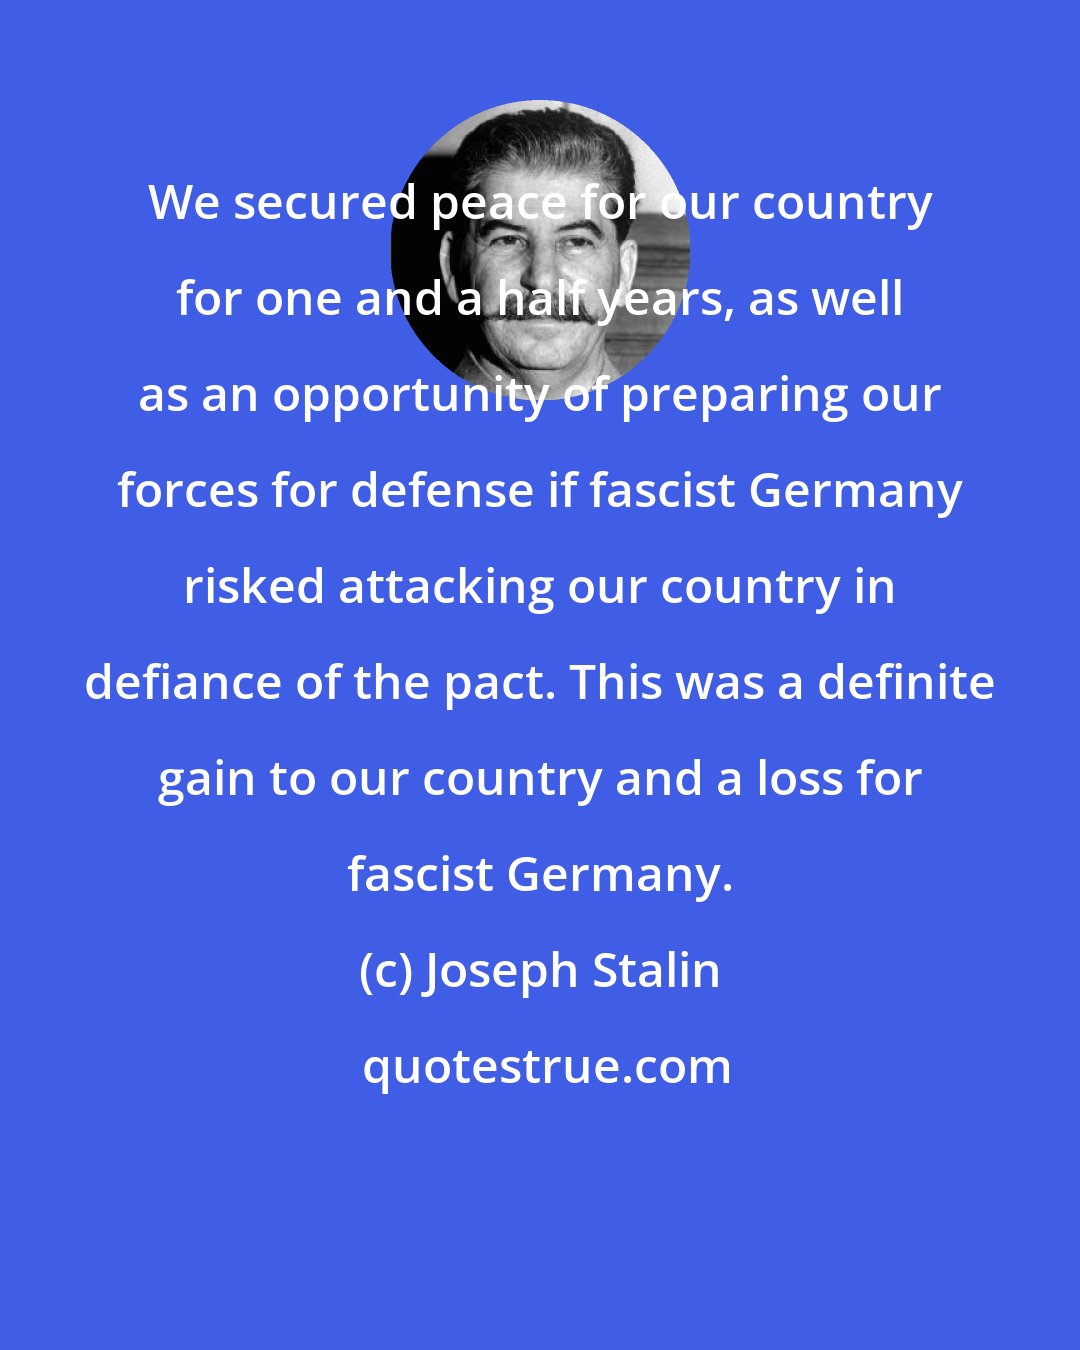 Joseph Stalin: We secured peace for our country for one and a half years, as well as an opportunity of preparing our forces for defense if fascist Germany risked attacking our country in defiance of the pact. This was a definite gain to our country and a loss for fascist Germany.